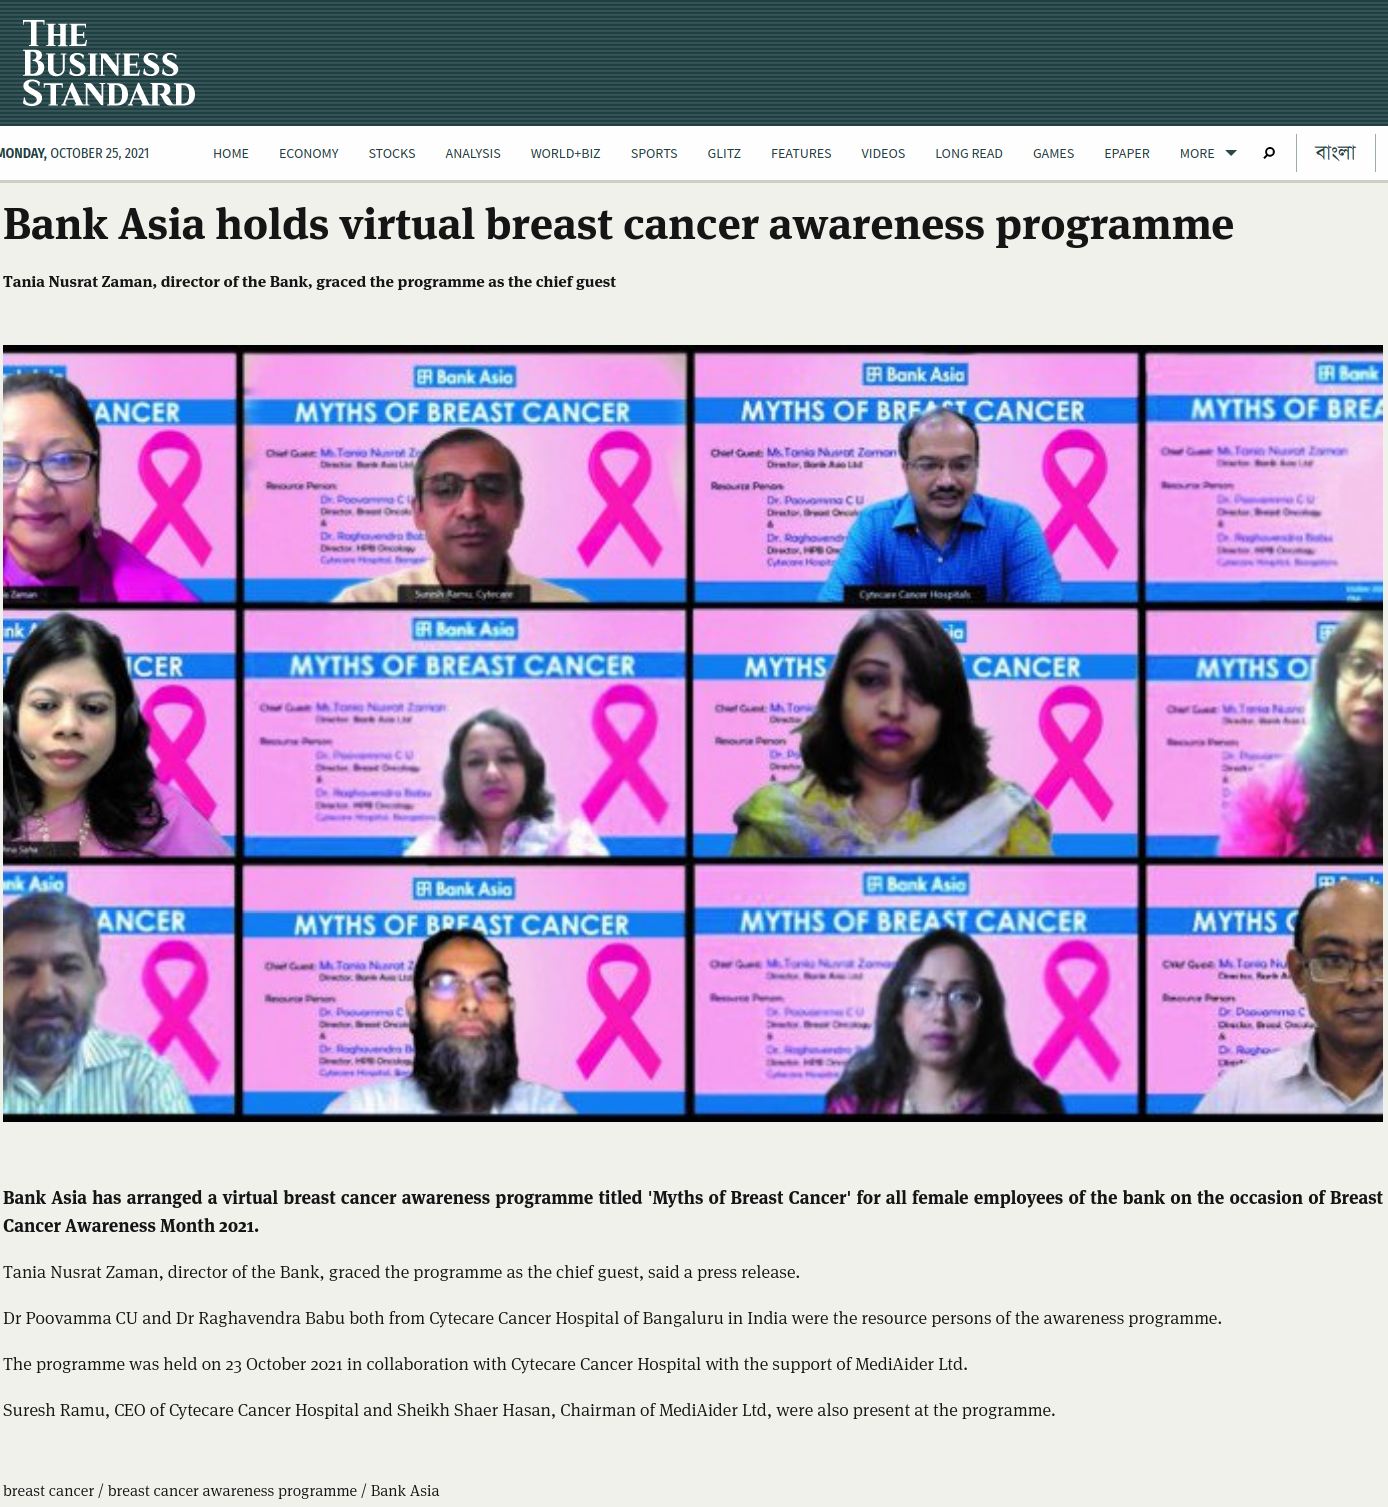 Bank Asia holds virtual breast cancer awareness programme